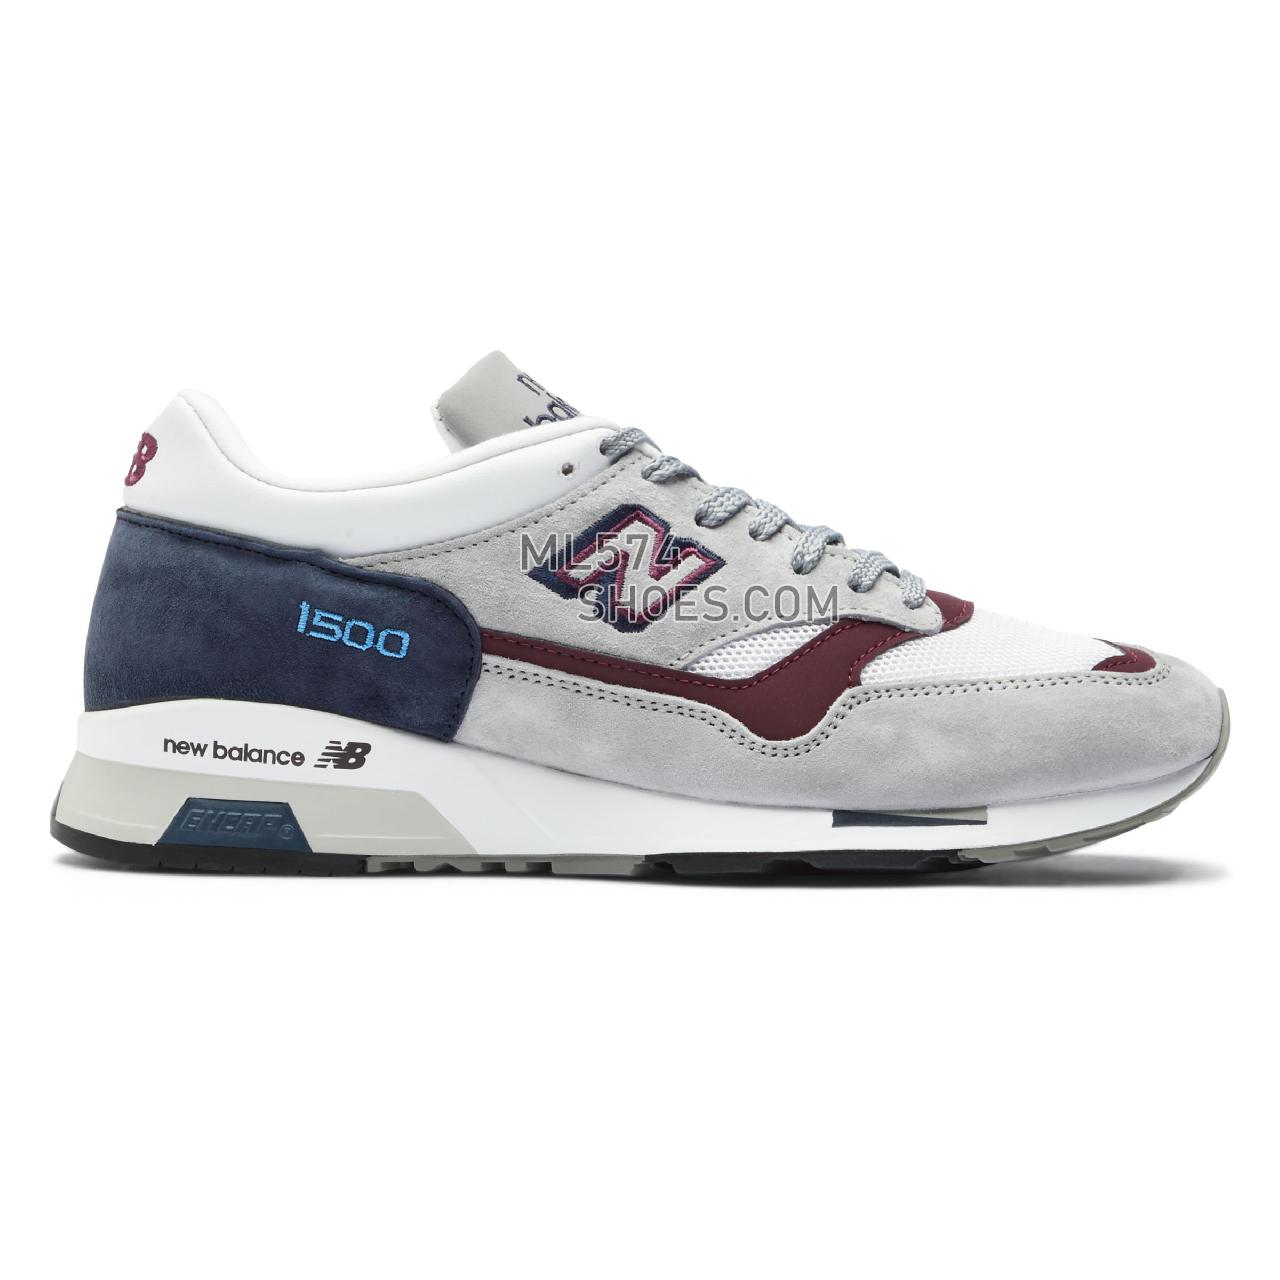 New Balance MADE in UK 1500 - Men's Made in USA And UK Sneakers - Grey with navy and white - M1500NBR